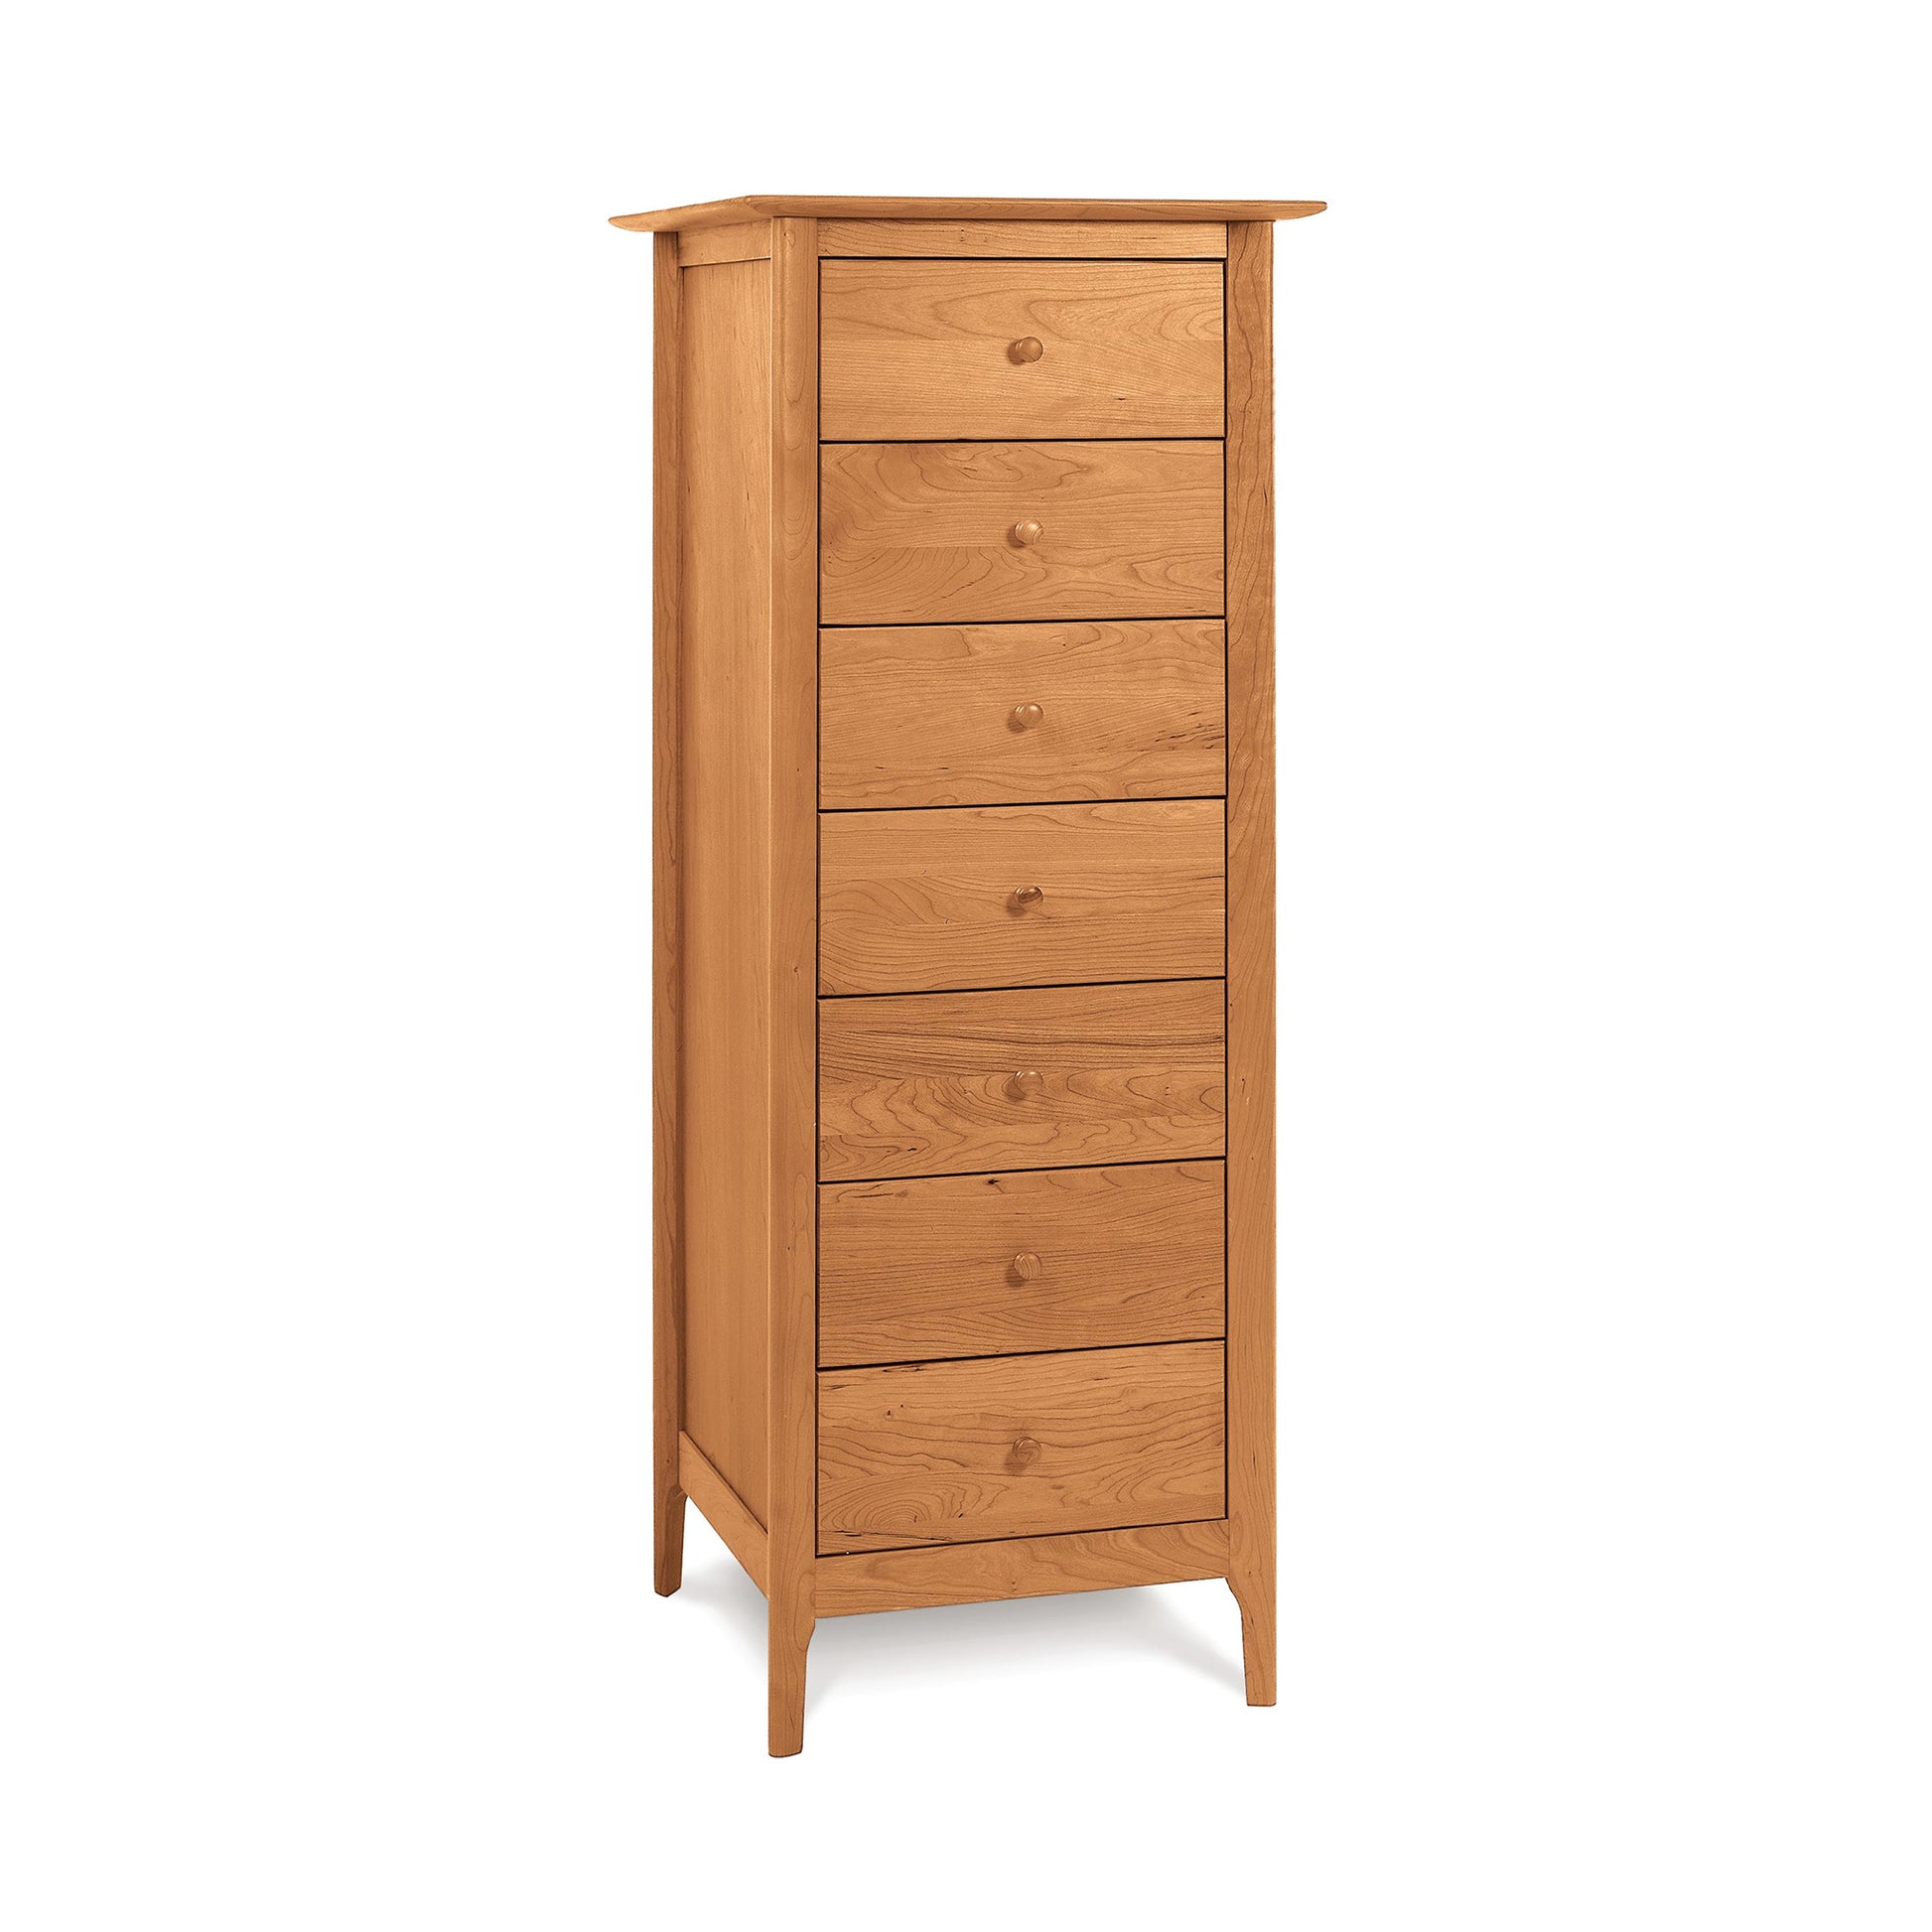 A tall eco-friendly Sarah 7-Drawer Lingerie Chest, crafted from natural cherry wood, stands against a white background. Brand Name: Copeland Furniture